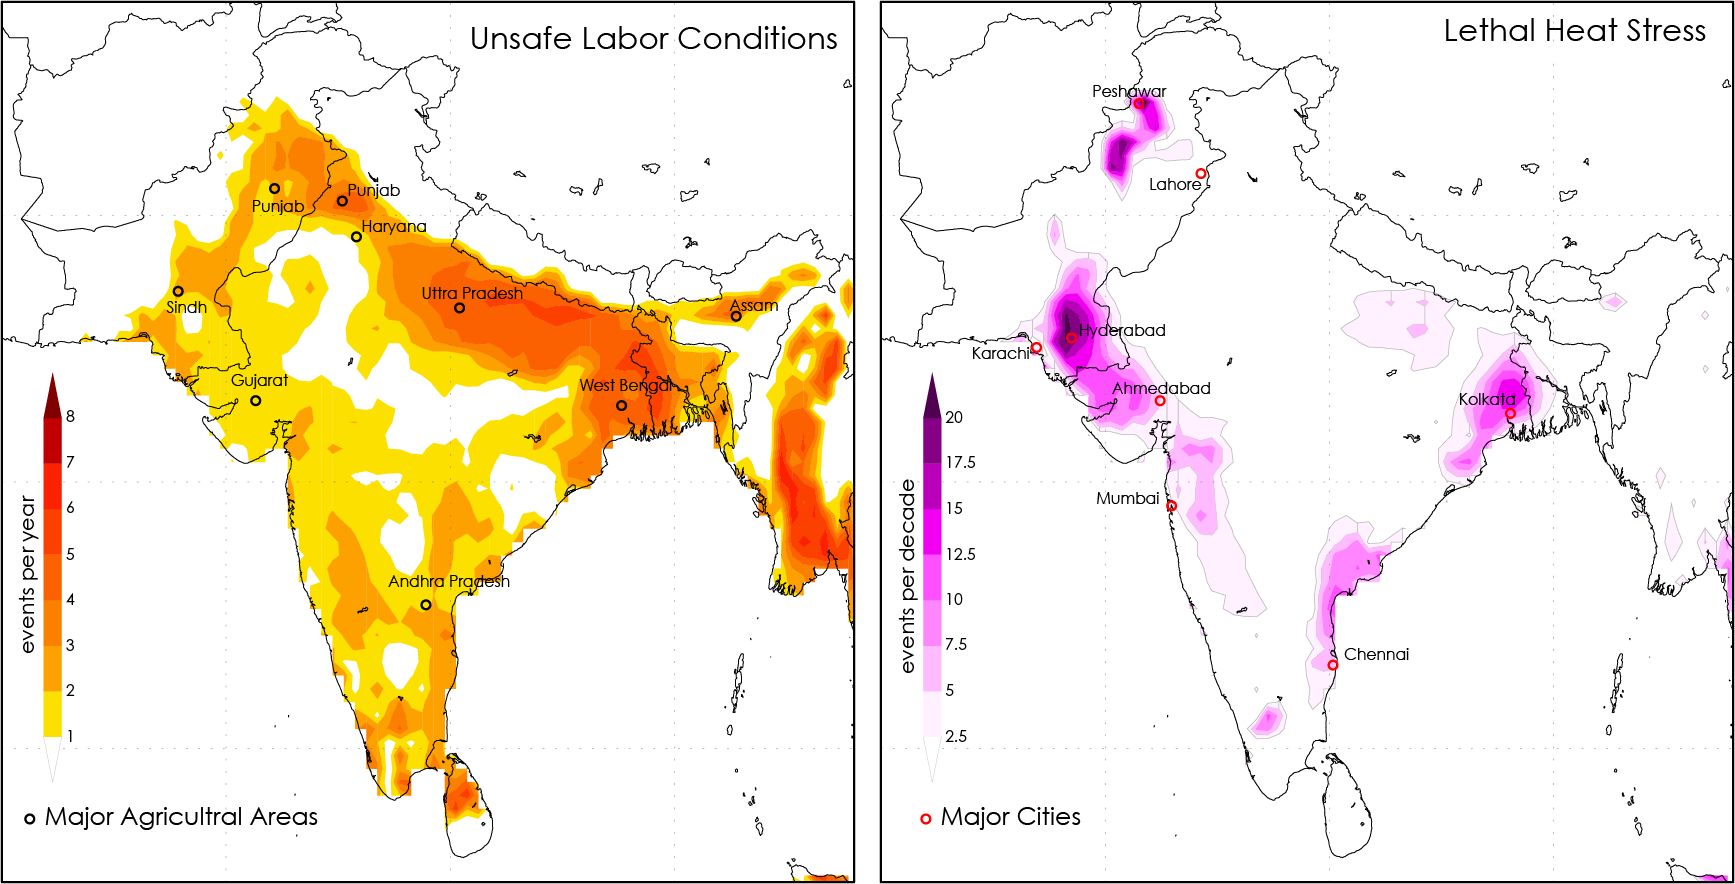 side by side maps of India comparing unsafe labor conditions and heat stress